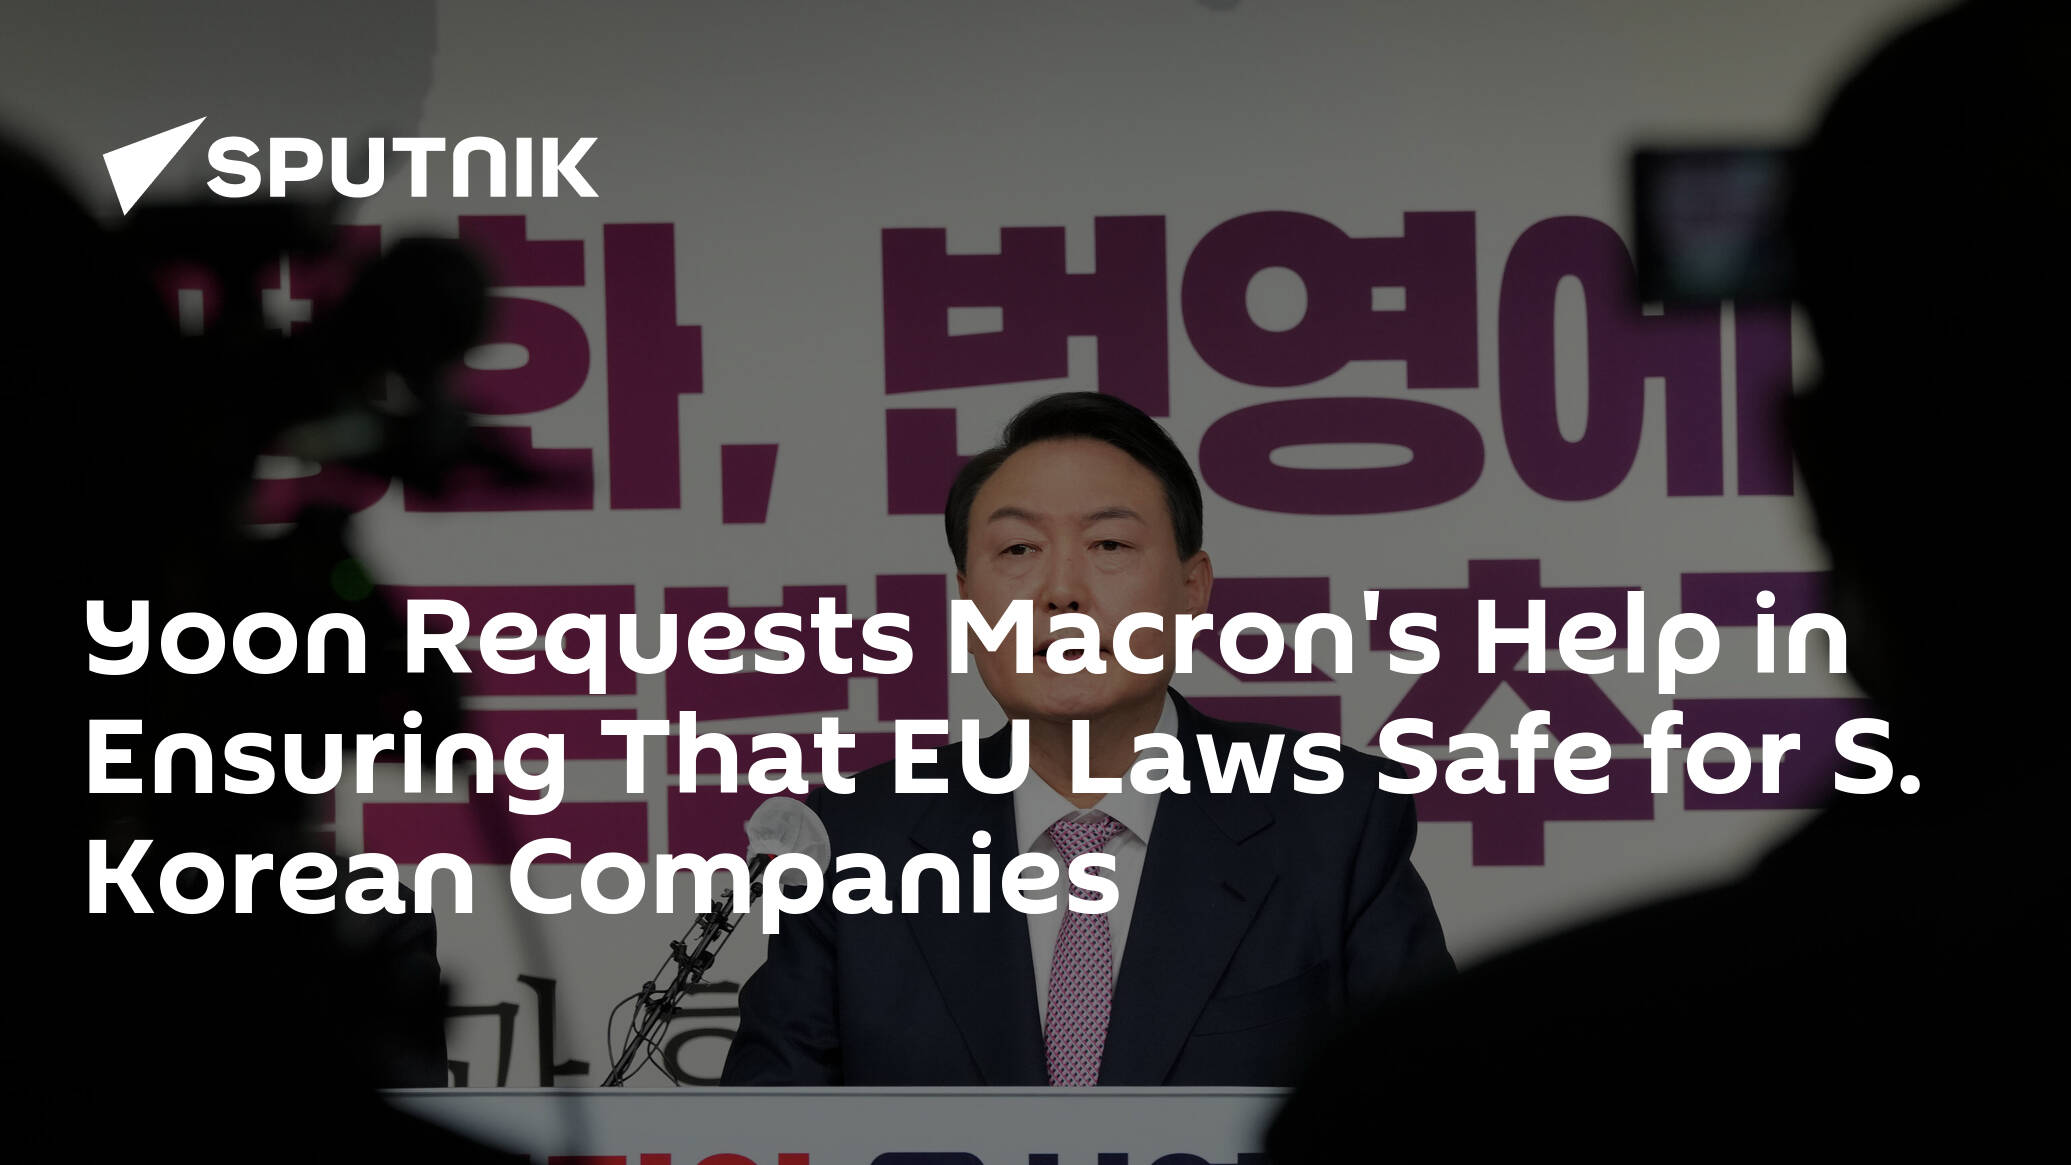 Yoon Requests Macron's Help in Ensuring That EU Laws Safe for S. Korean Companies